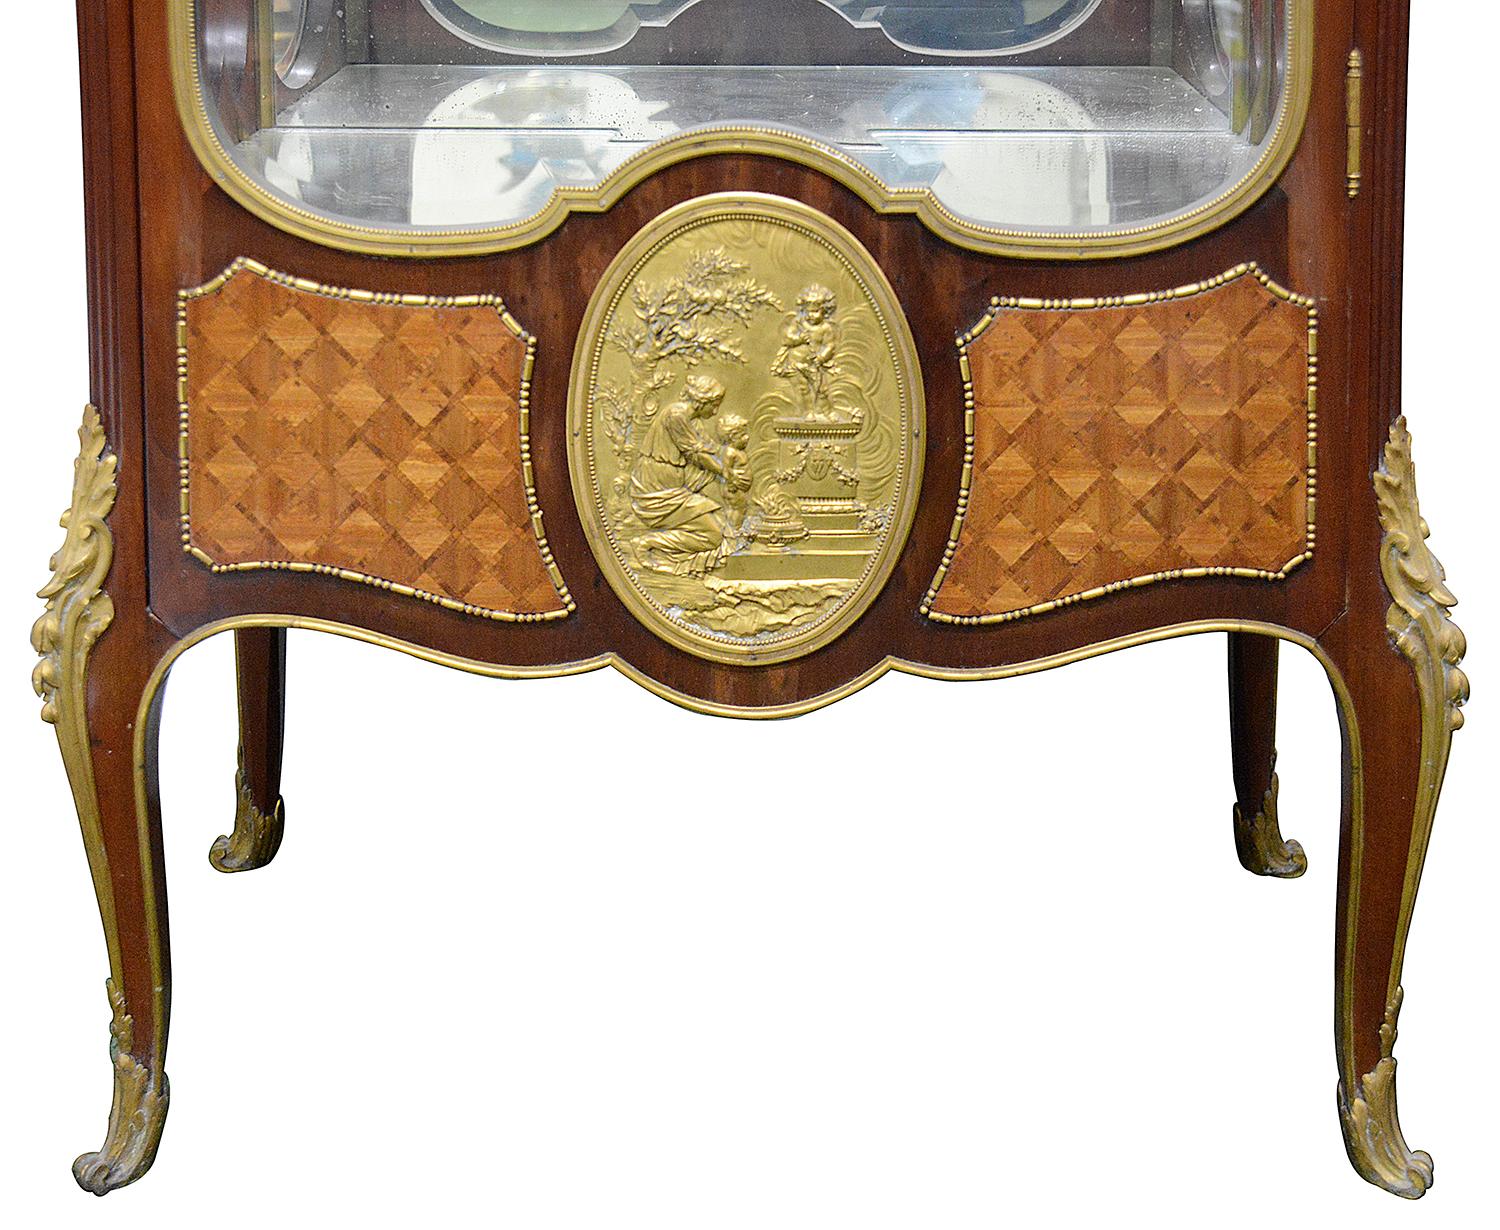 A fine quality late 19th Century French Louis XV style Mahogany vitrine, having its original Fleur De Pecher marble top, gilded ormolu mounts, a single glazed door opening to access adjustable glass shelves within. A classical gilded ormolu oval